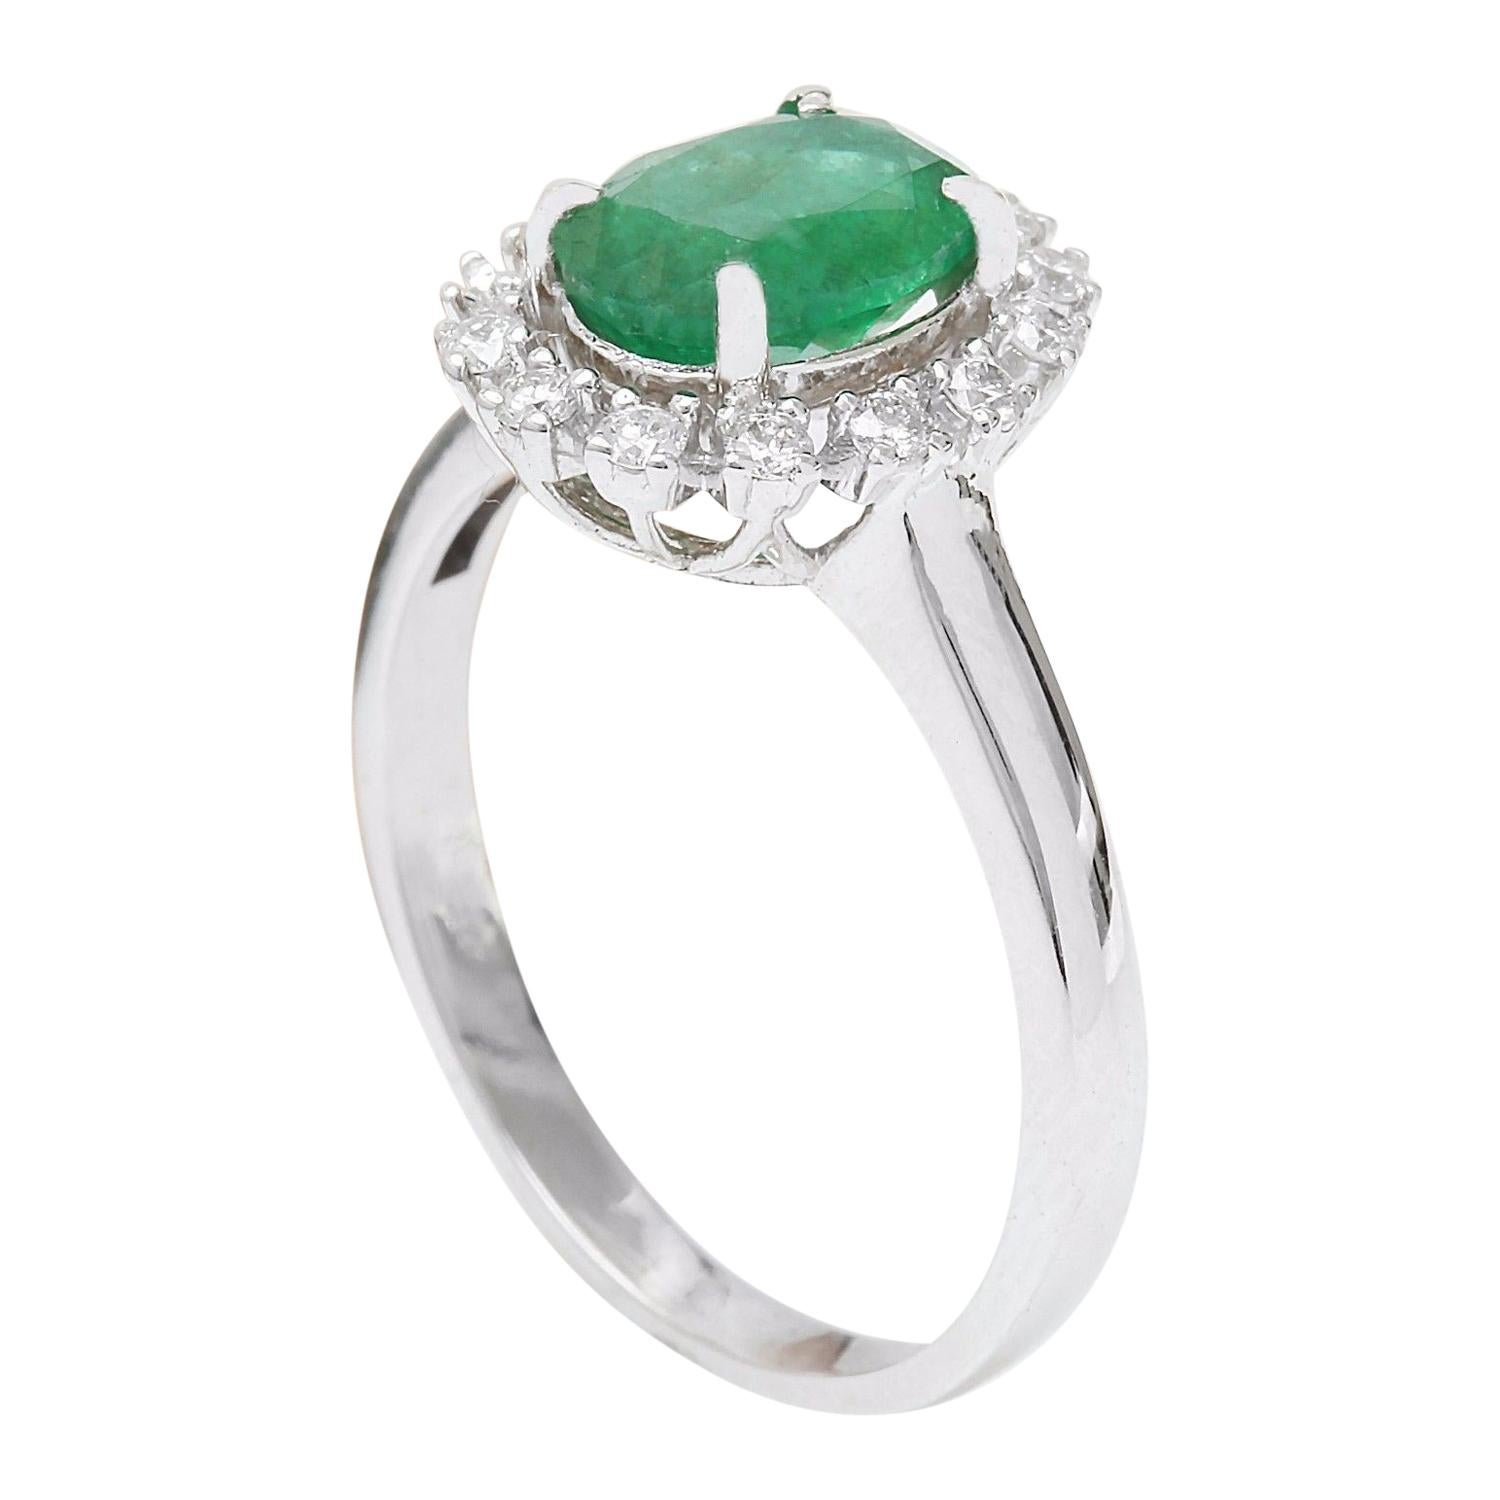 1.51 Carat Natural Emerald 14 Karat Solid White Gold Diamond Ring In New Condition For Sale In Los Angeles, CA